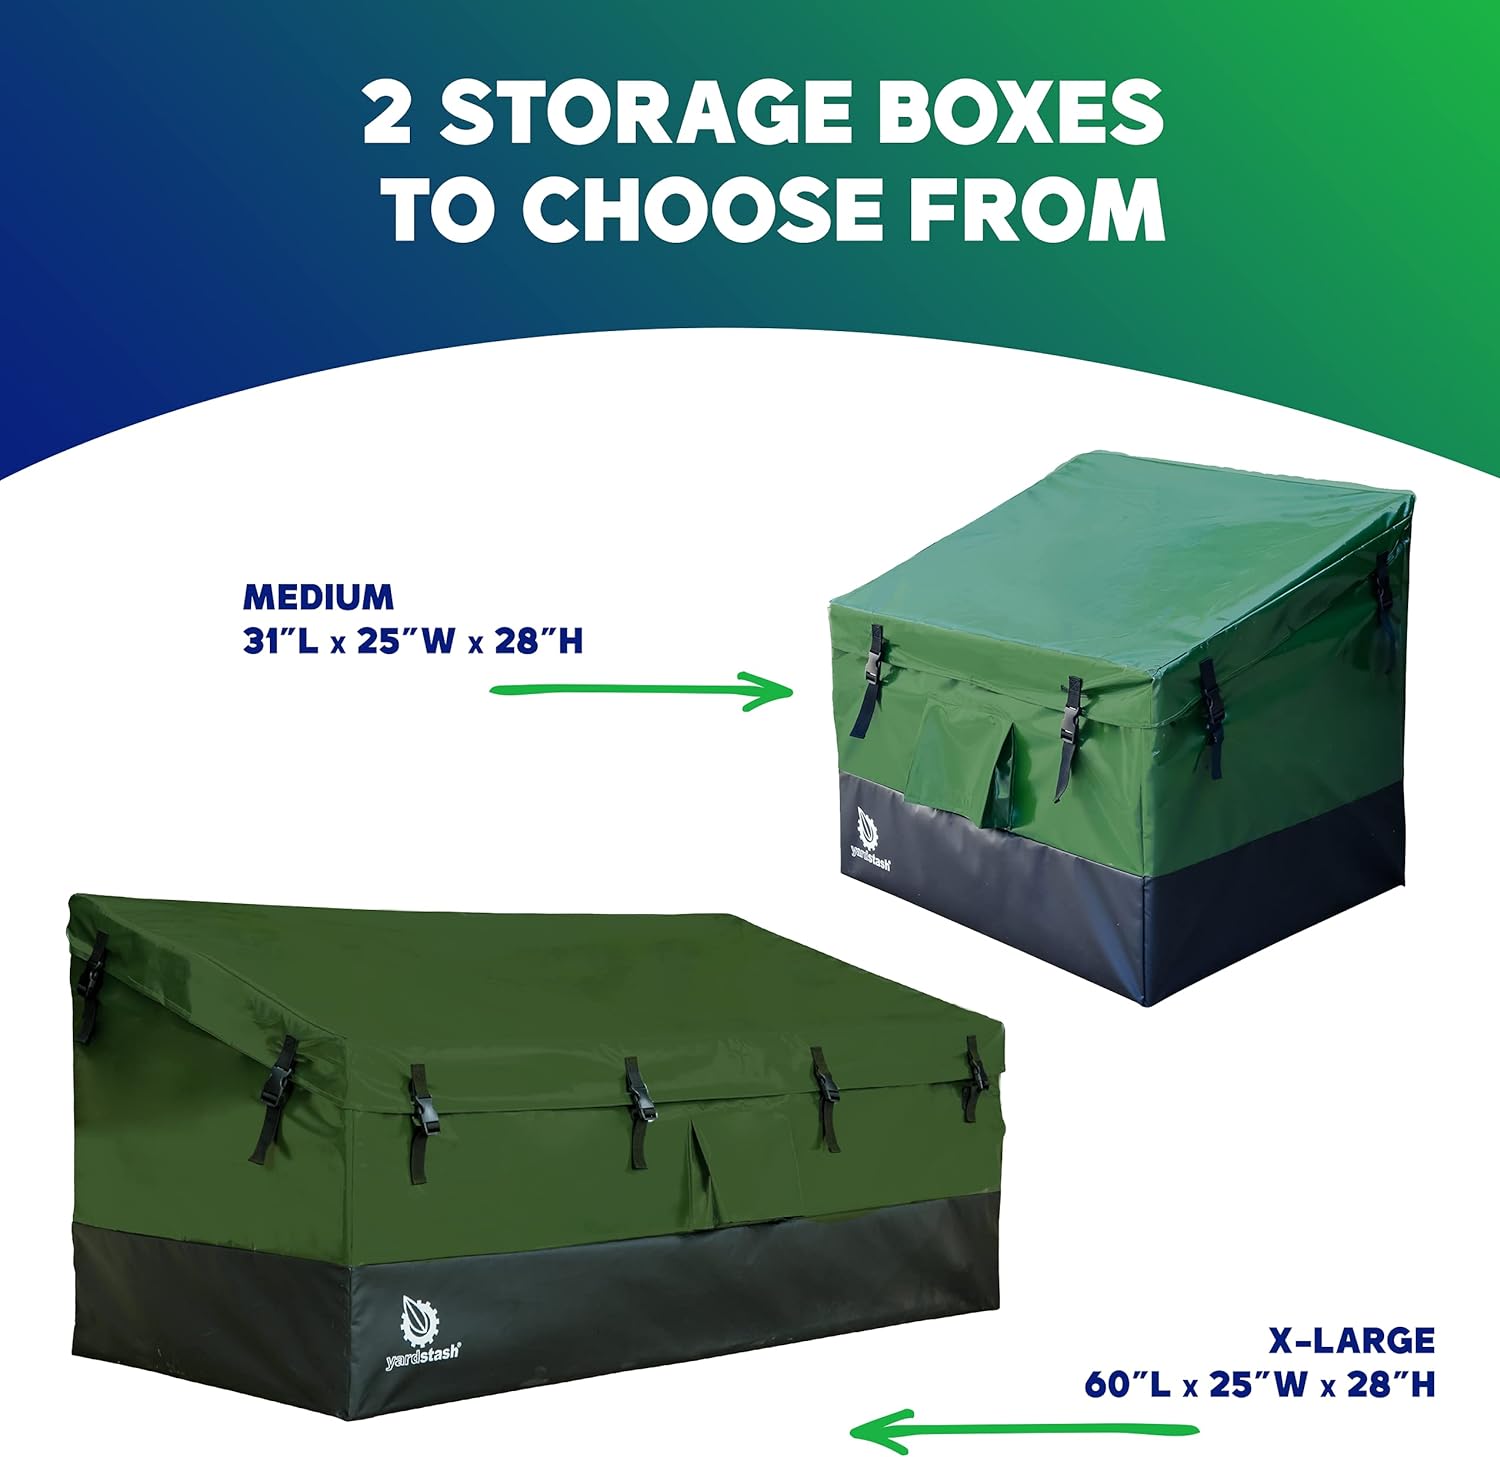 Waterproof Wind - Heavy Duty Sun & Snow Portable Patio Protects from Rain or Camping – XL Green Yard All Weather Tarpaulin Deck Box YardStash Outdoor Storage Box Perfect for the Boat